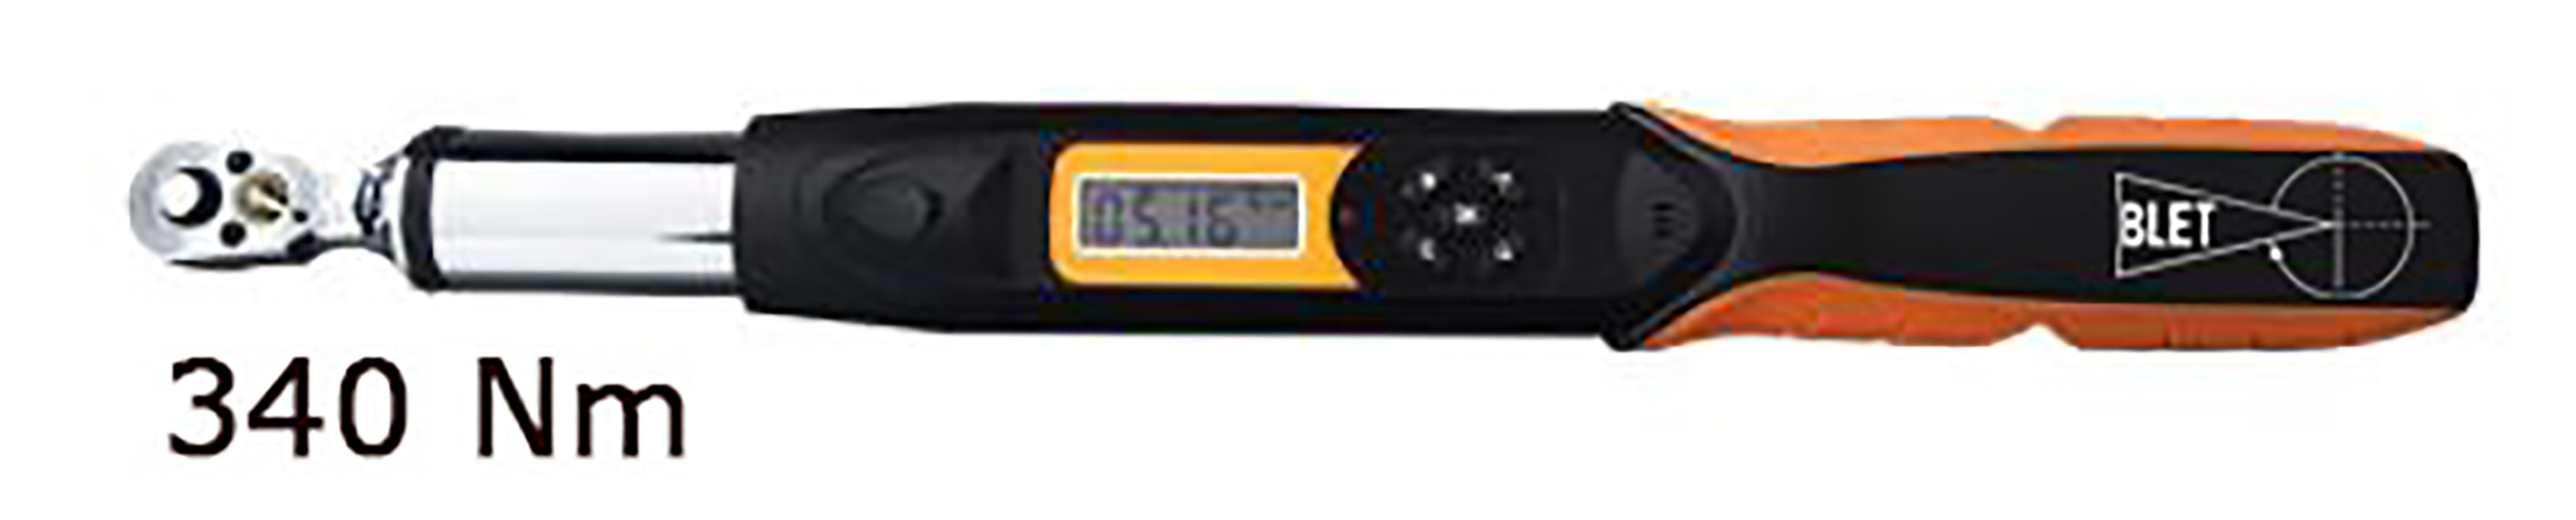 DIGITAL TORQUE WRENCH WITH COMMUNICATION 340 Nm READING 0,1 Nm SIZE 1/2" BLET<br>Ref : CLET5-CDP34012